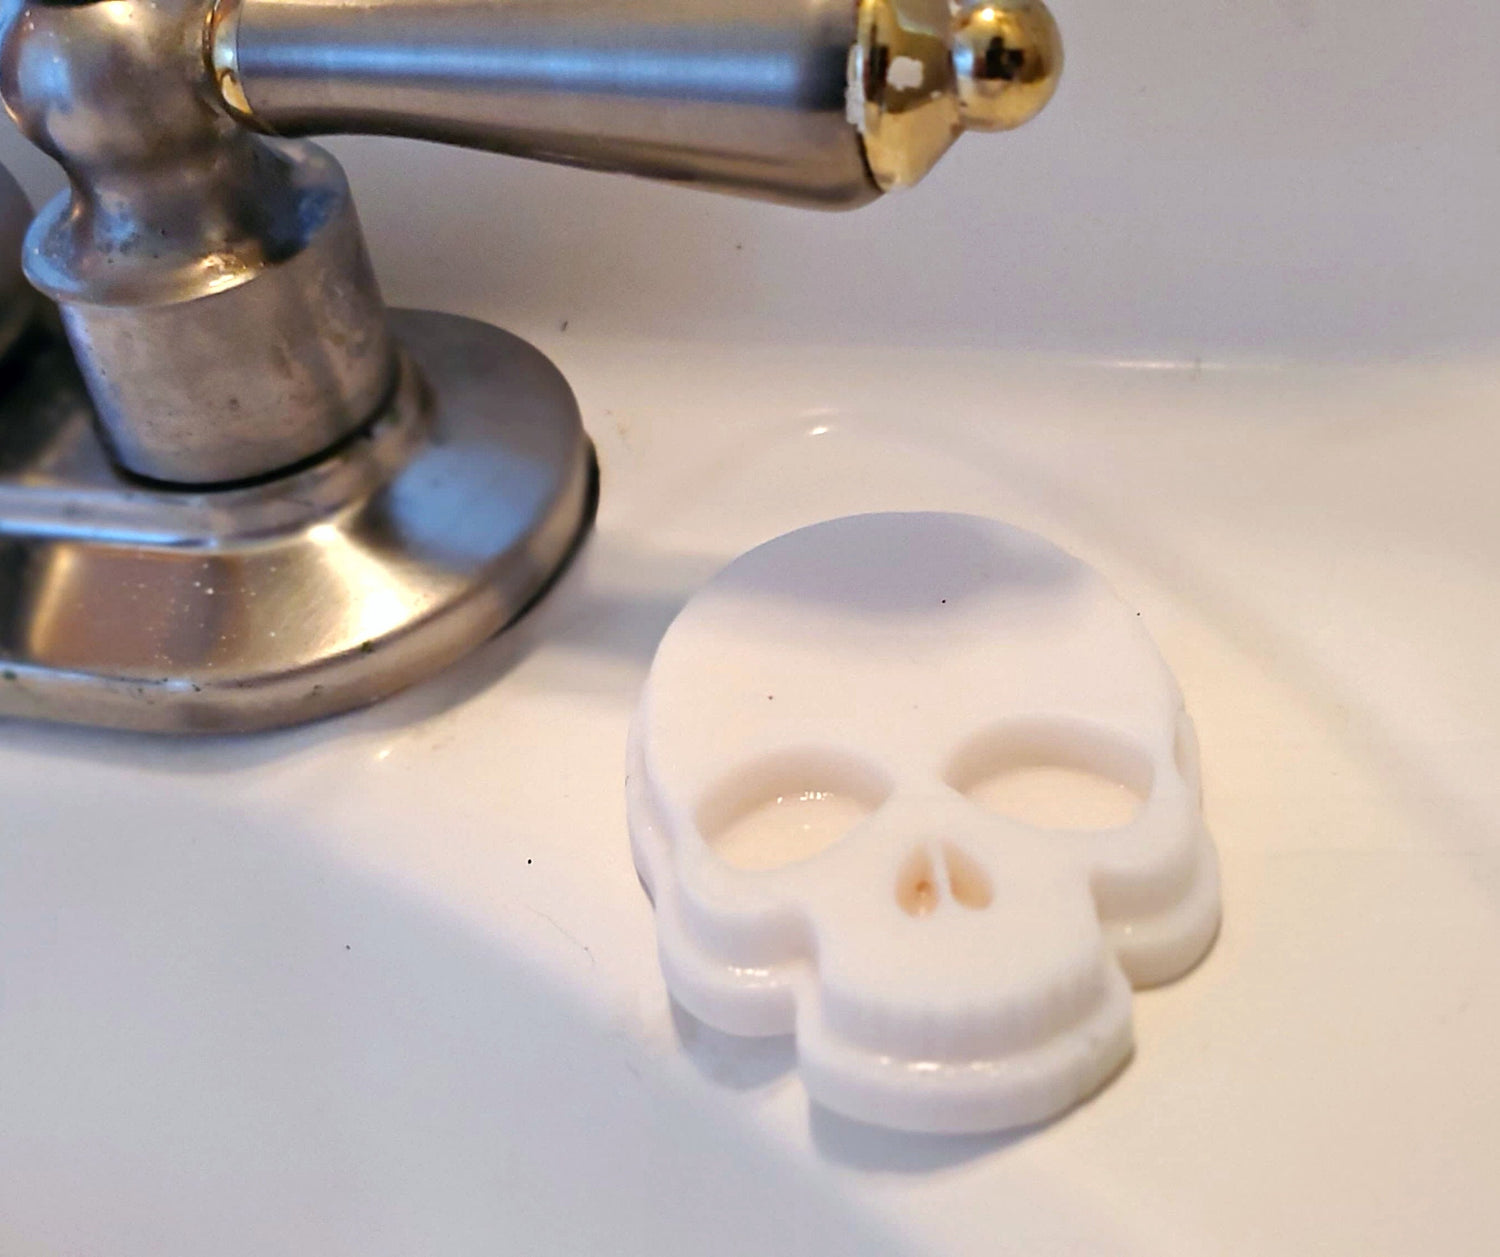 Handmade Skull Gothic Soap made with Shea and Oatmeal Lord and Lady Towers